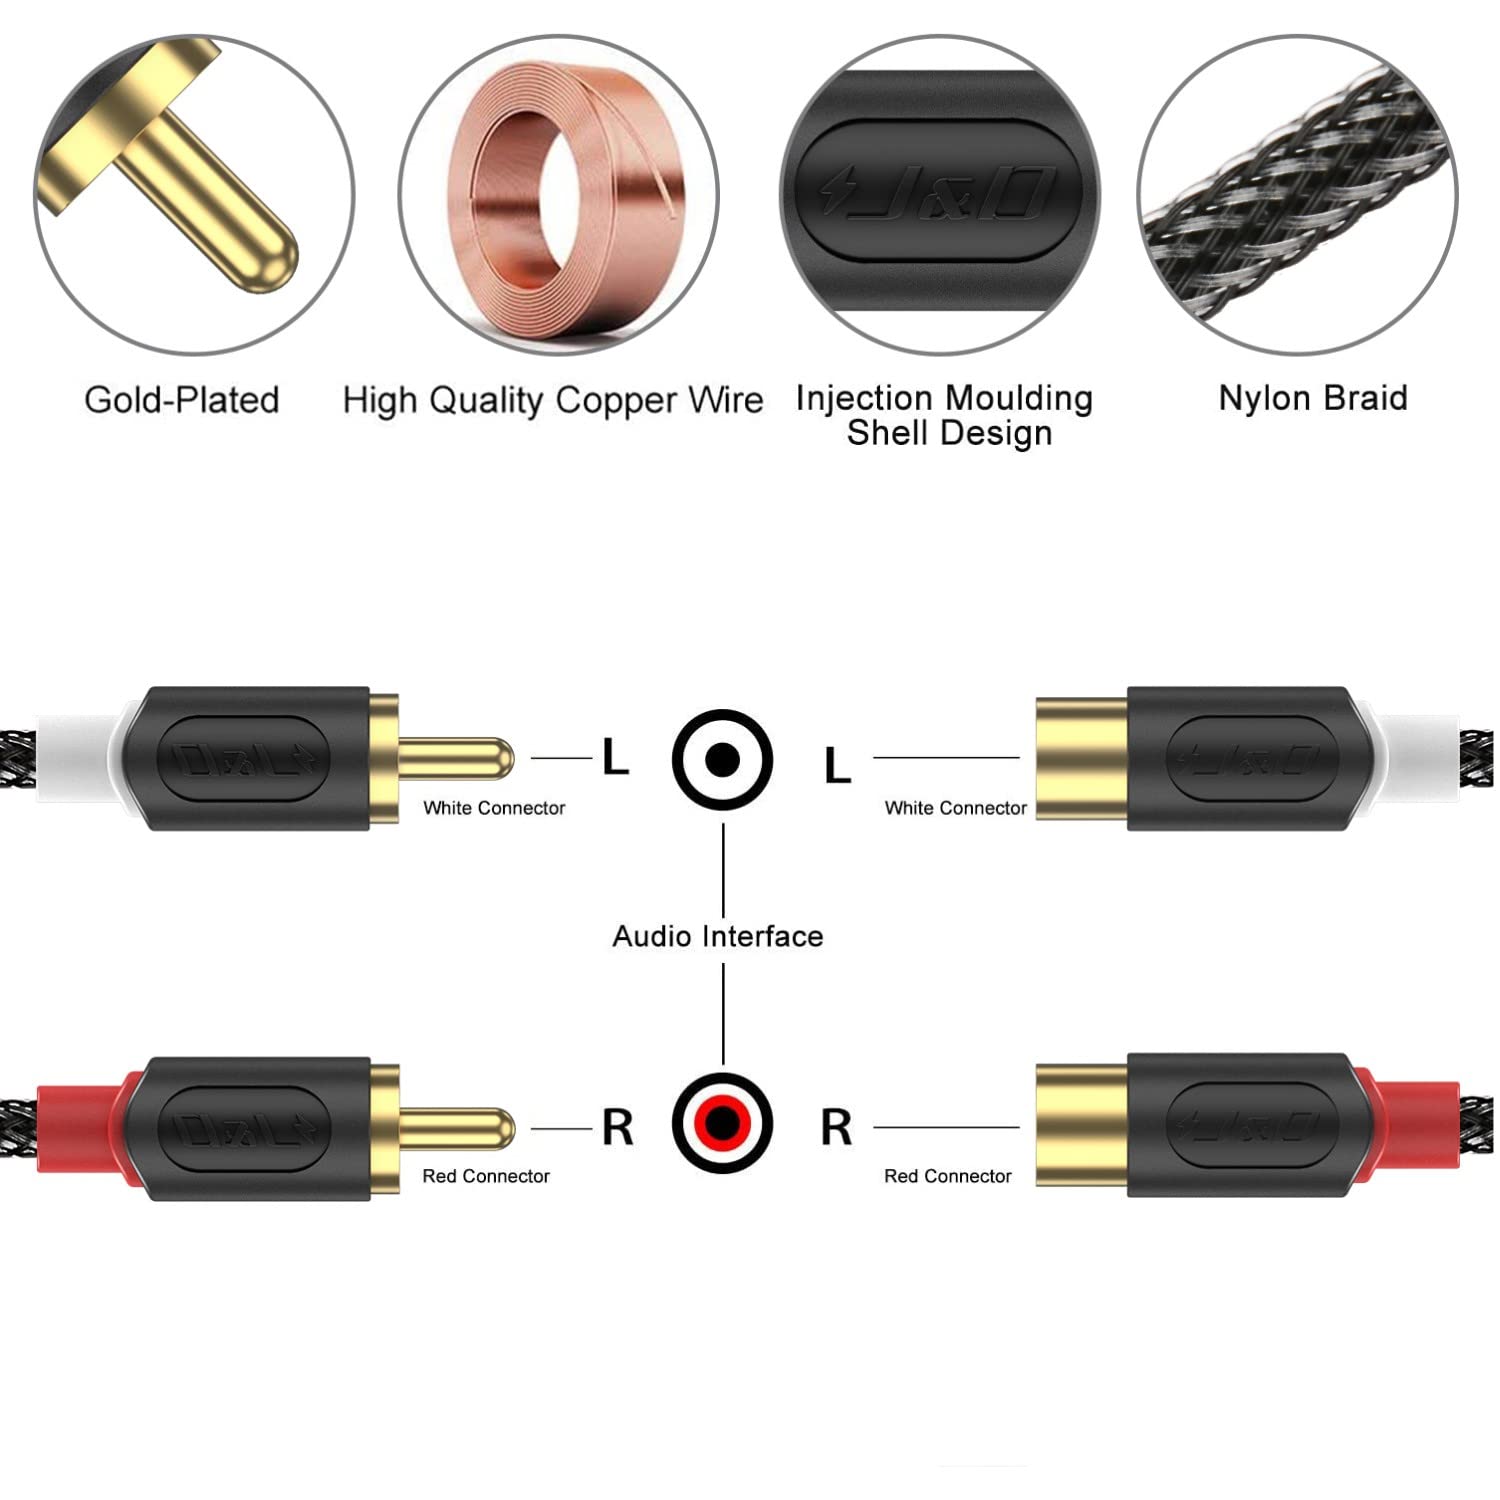 J&D 2 RCA Male to 2 RCA Female Stereo Audio Extension Cable, PVC Shelled and Nylon Braid, 6ft - image 5 of 5